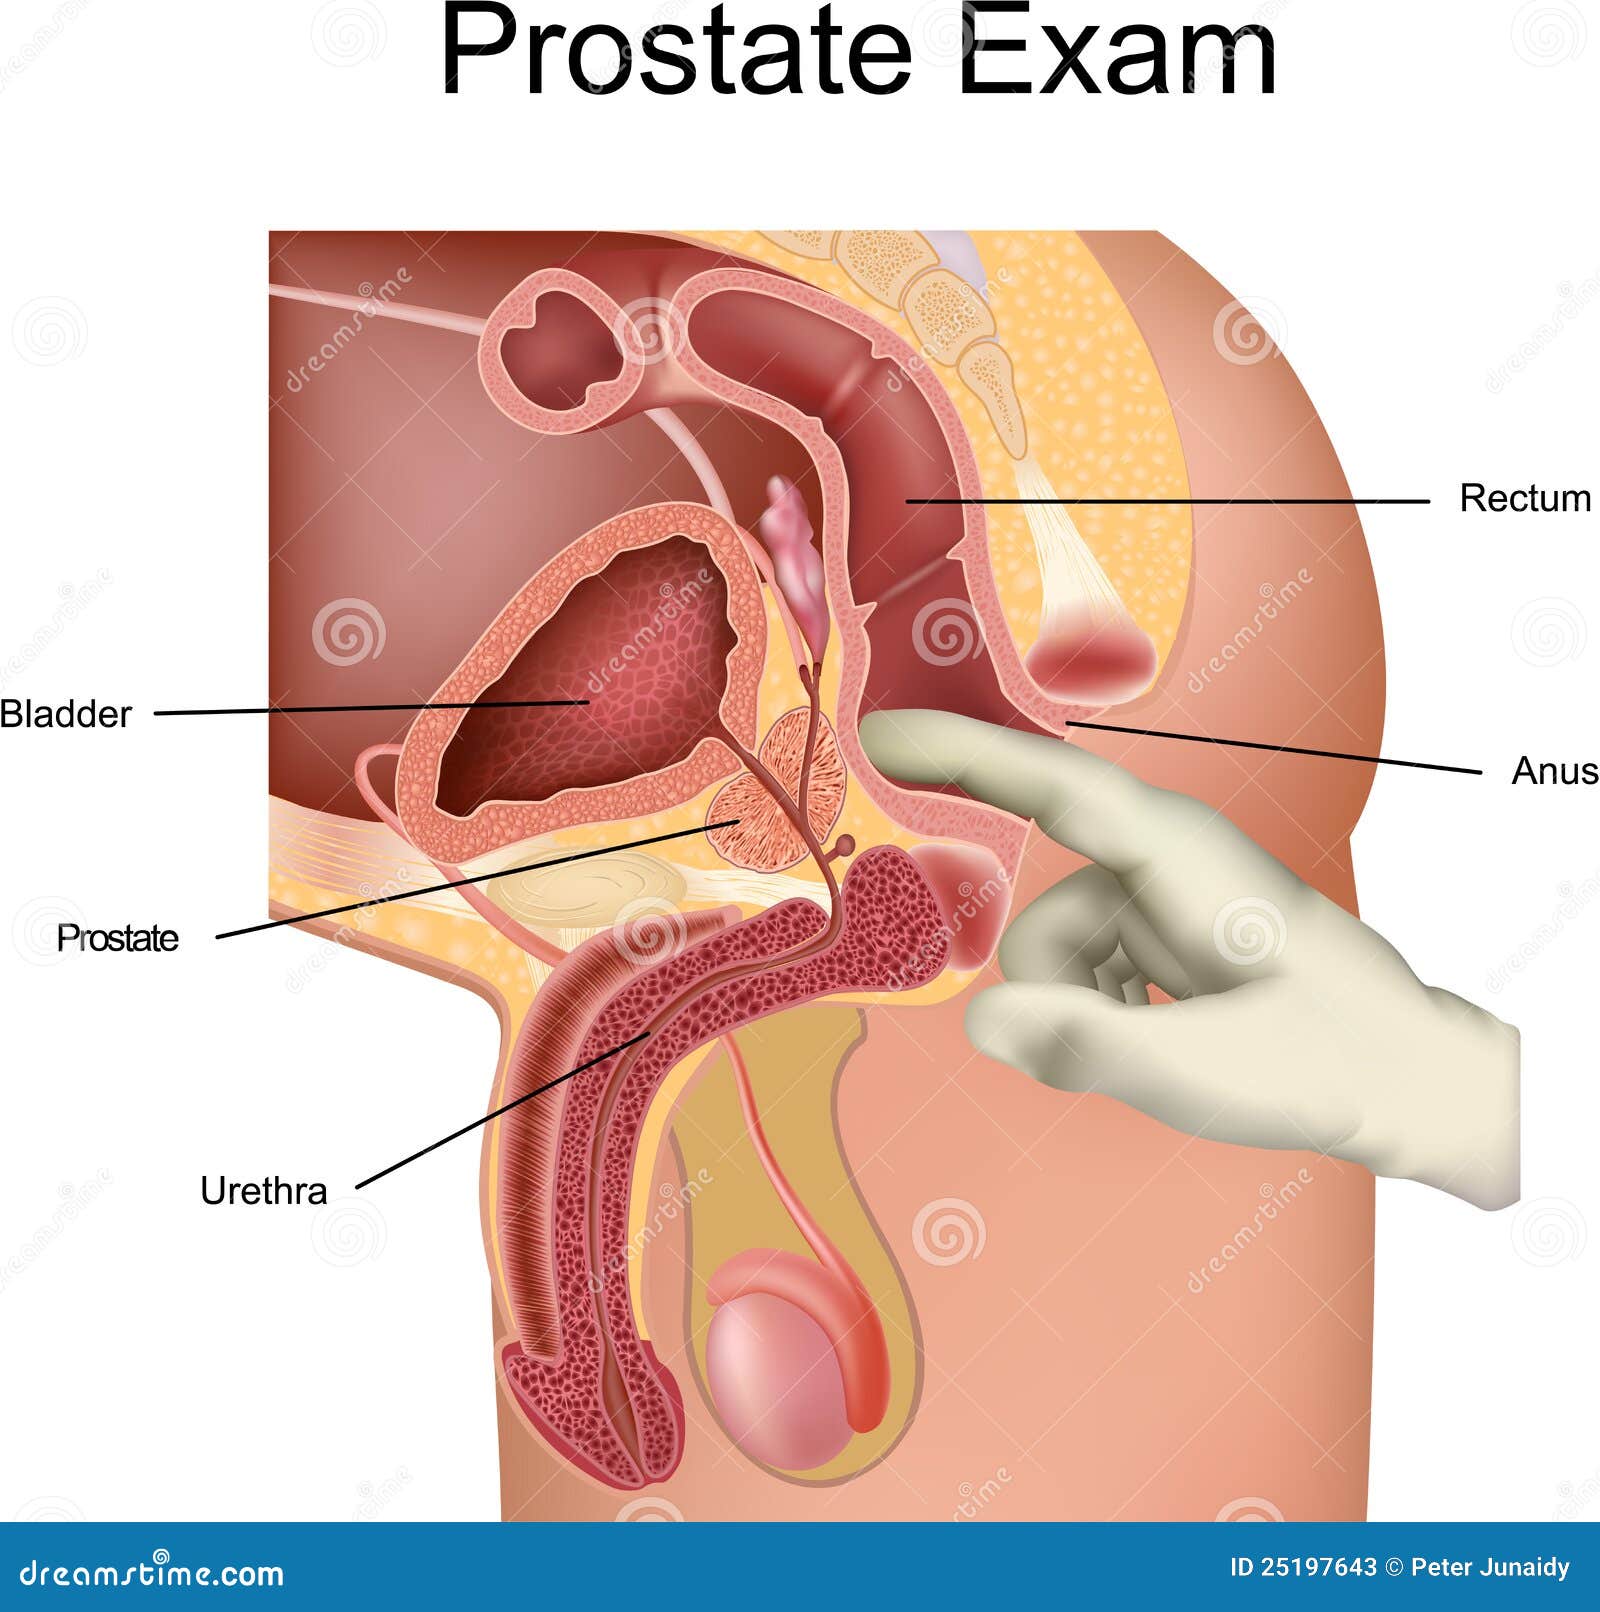 Prostate exam what to expect